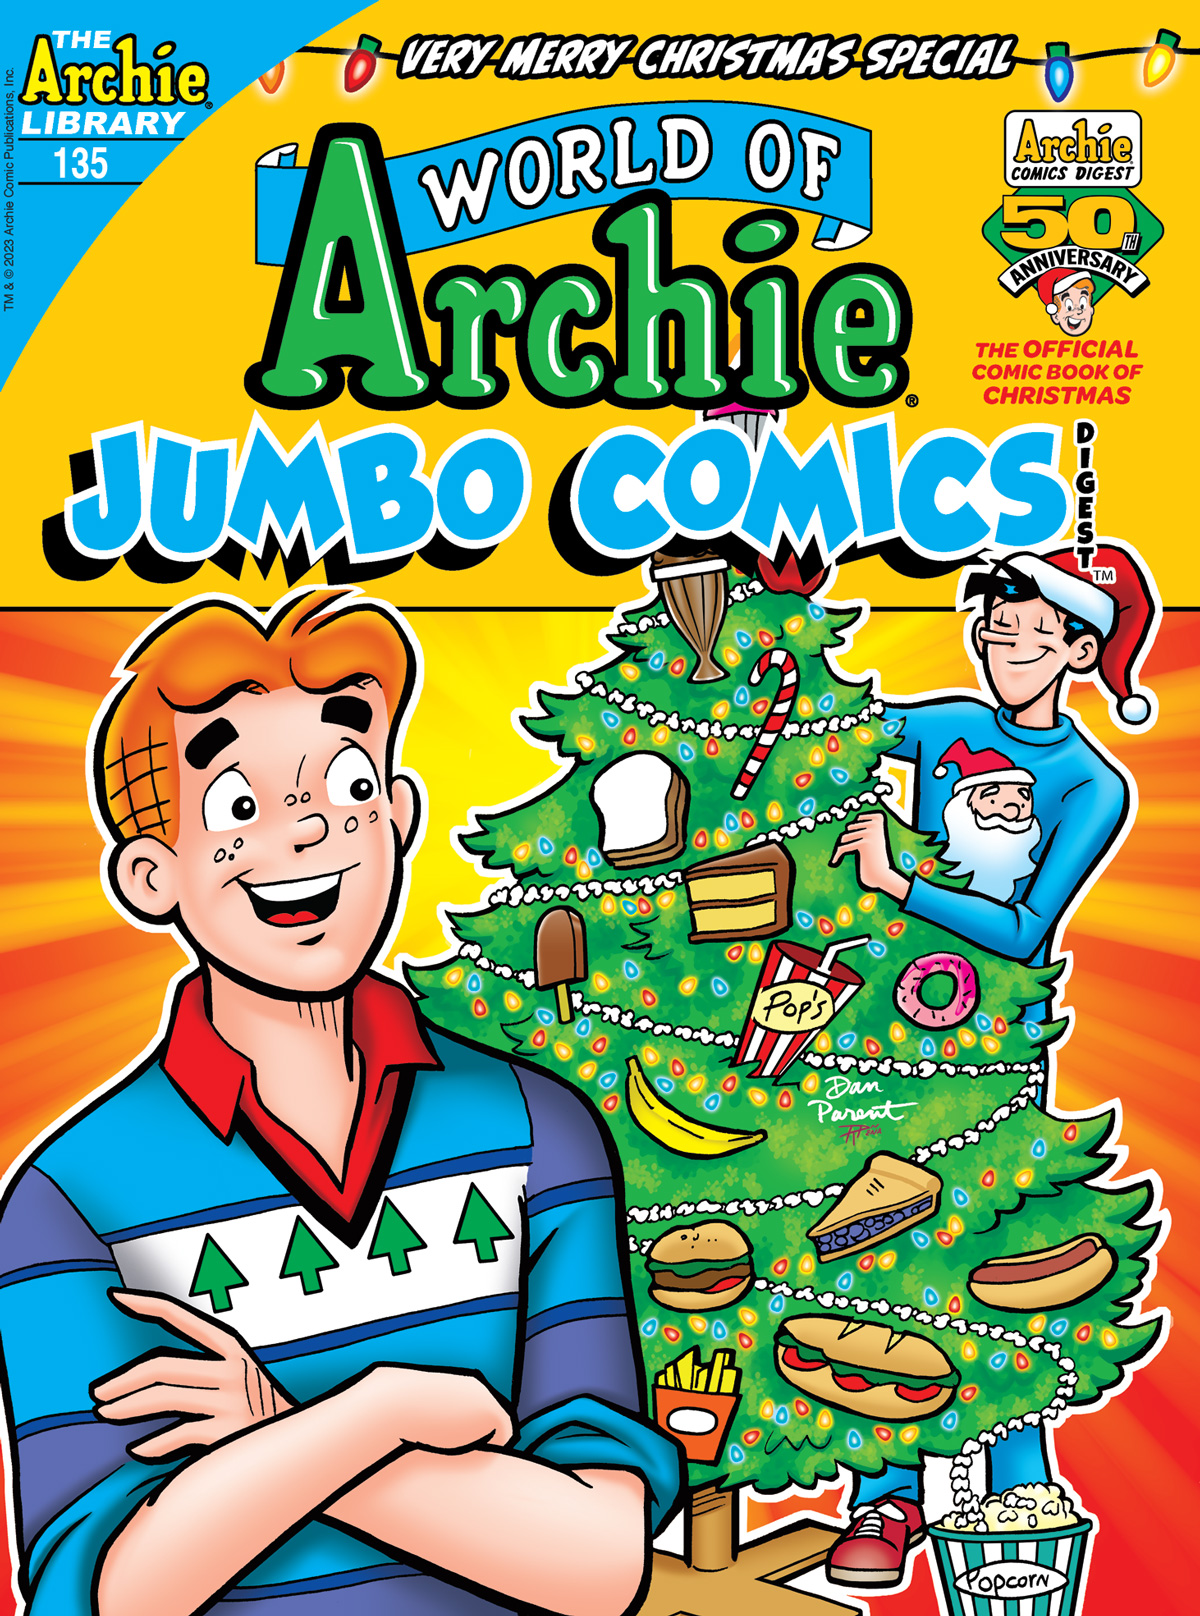 The cover of WORLD OF ARCHIE DIGEST #135. Jughead decorates the Christmas tree with food while Archie looks on.